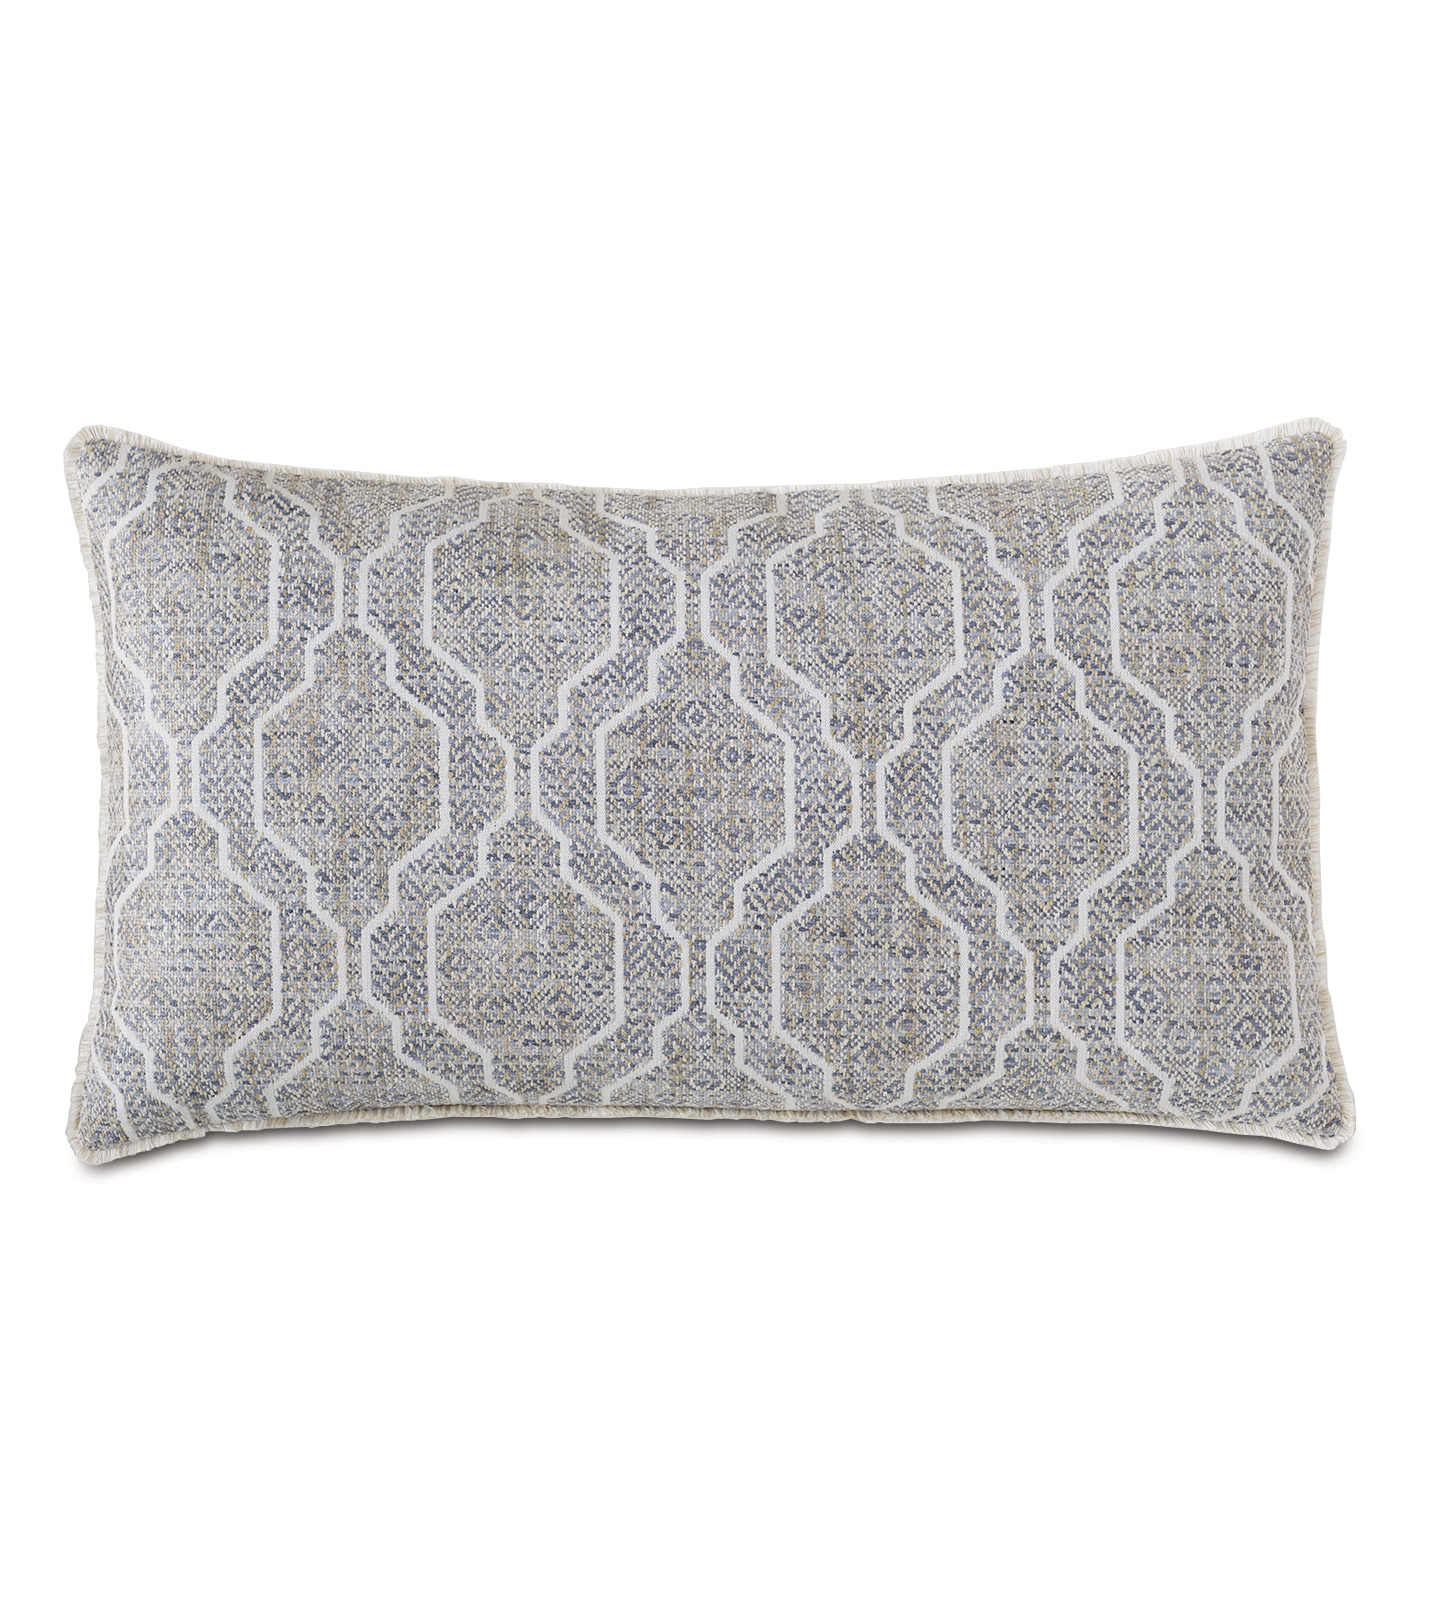 Safford Ogee Decorative Pillow | Eastern Accents